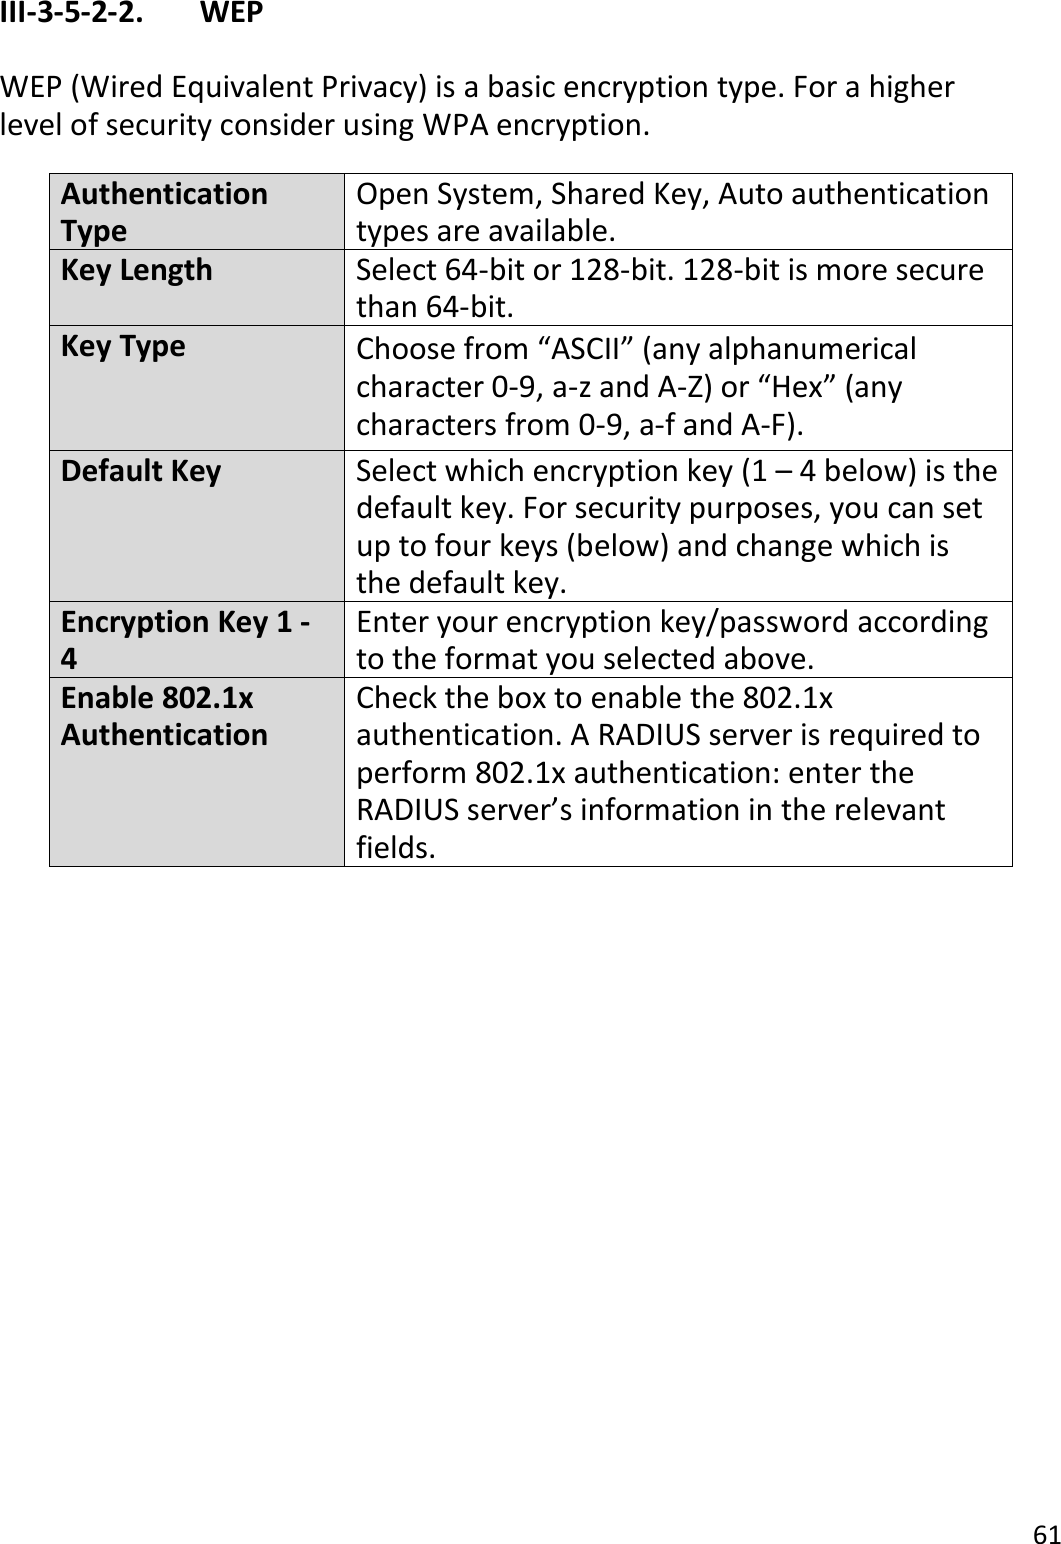 61  III-3-5-2-2.    WEP  WEP (Wired Equivalent Privacy) is a basic encryption type. For a higher level of security consider using WPA encryption.  Authentication Type Open System, Shared Key, Auto authentication types are available. Key Length Select 64-bit or 128-bit. 128-bit is more secure than 64-bit. Key Type Choose from “ASCII” (any alphanumerical character 0-9, a-z and A-Z) or “Hex” (any characters from 0-9, a-f and A-F). Default Key Select which encryption key (1 – 4 below) is the default key. For security purposes, you can set up to four keys (below) and change which is the default key. Encryption Key 1 - 4 Enter your encryption key/password according to the format you selected above. Enable 802.1x Authentication Check the box to enable the 802.1x authentication. A RADIUS server is required to perform 802.1x authentication: enter the RADIUS server’s information in the relevant fields.    